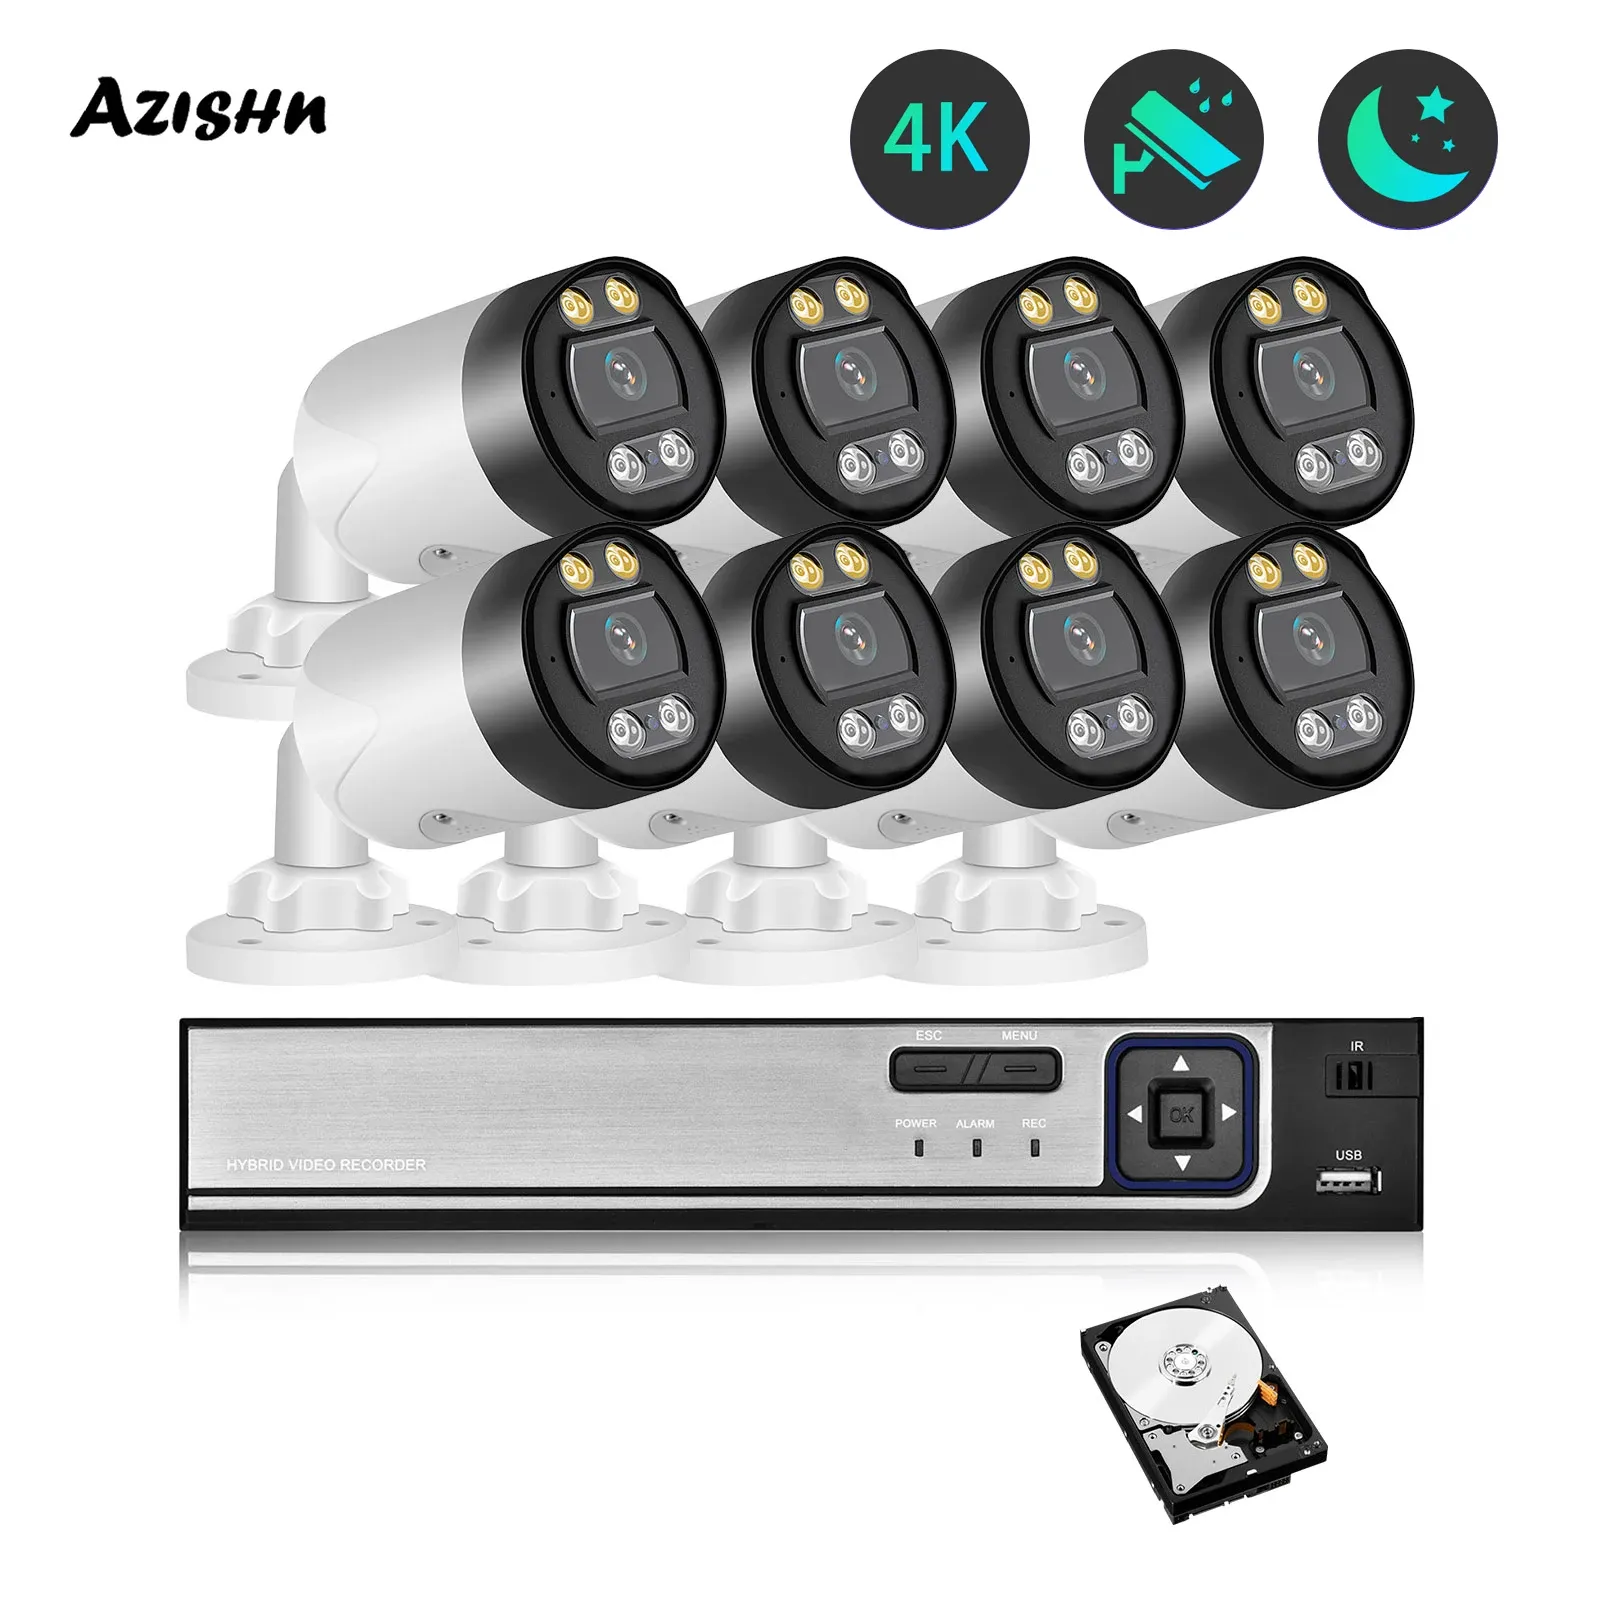 System Azishn 8MP 4K IP Bullet Camera 8CH NVR CCTV System Kit Outdoor Waterproof Two Way Audio Security Surveillance Protection Camera